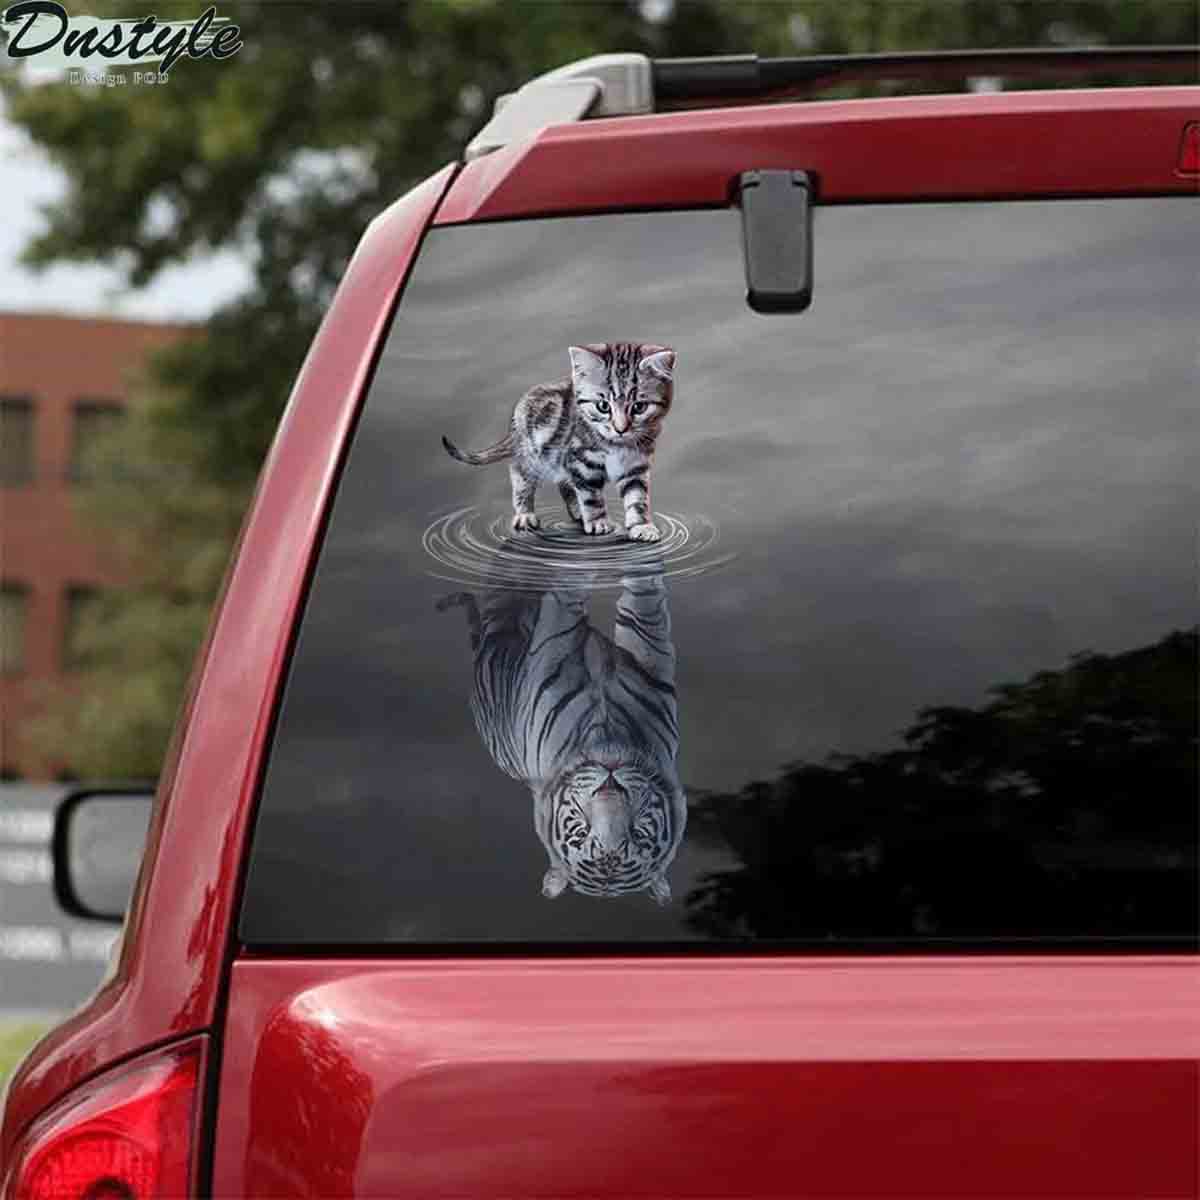 Cats tigers animal cute car decal sticker 1